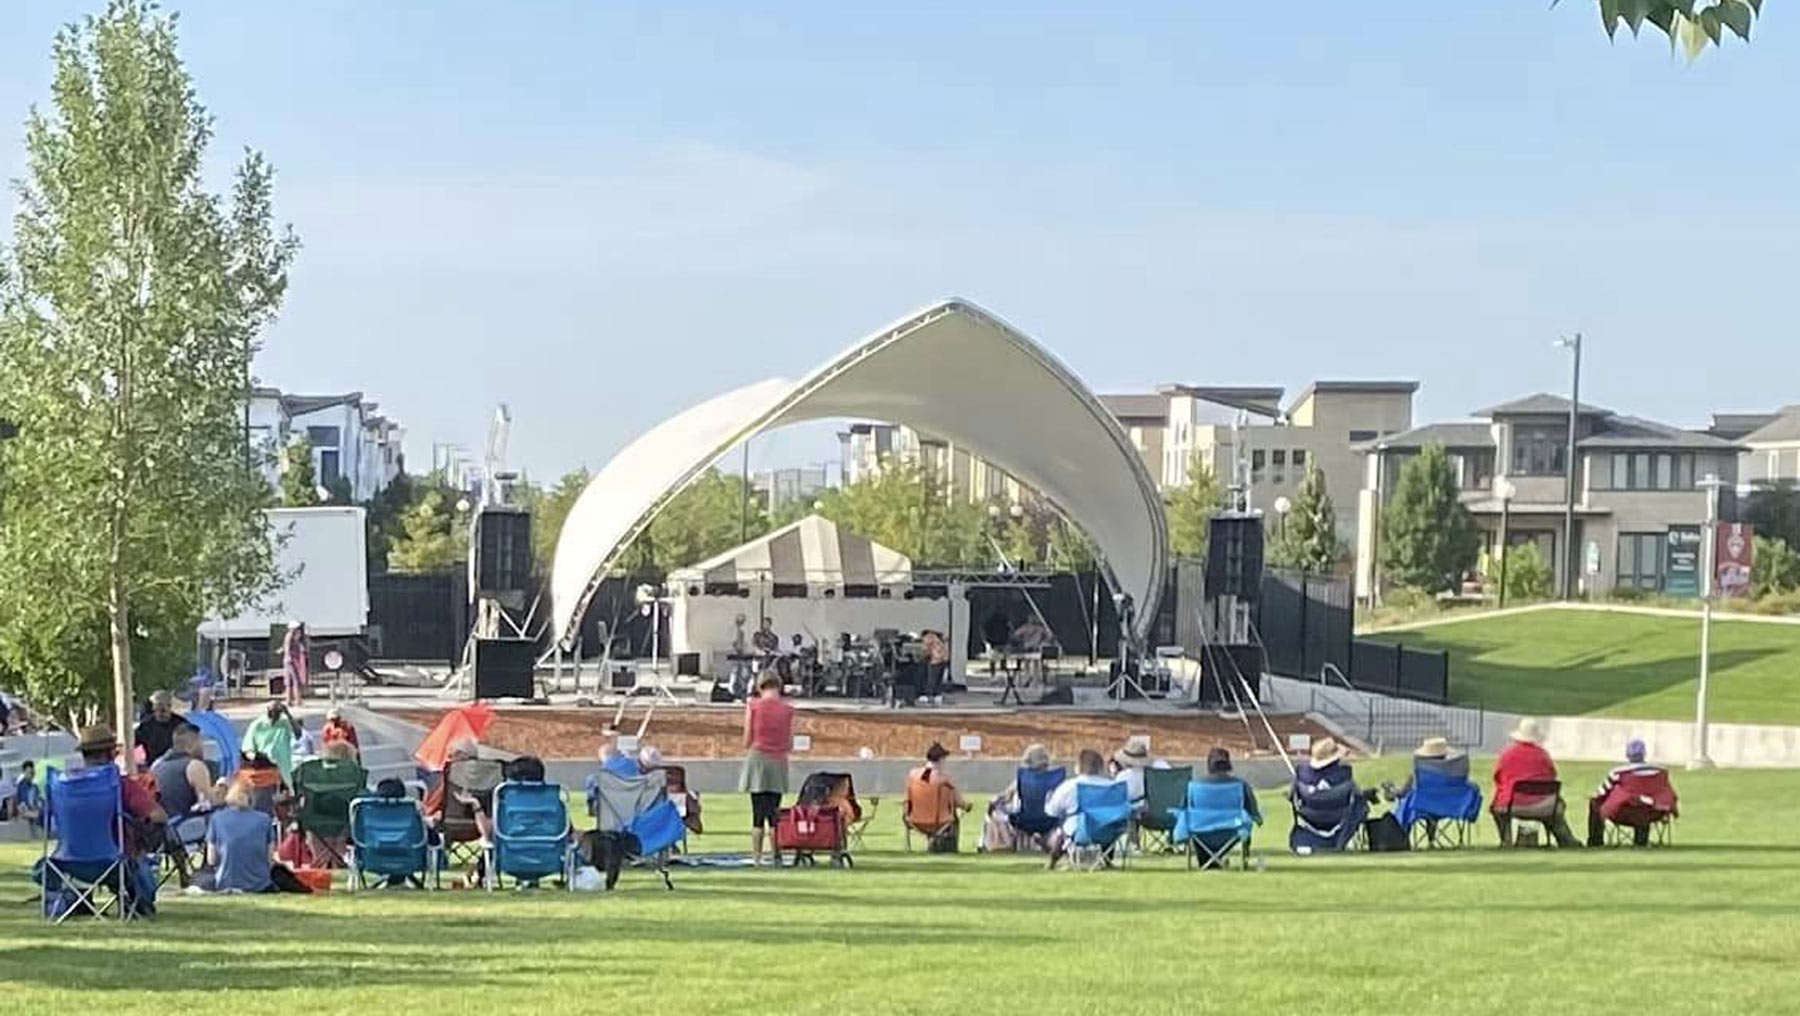 Central Park Denver Guide: Events, Concerts and Things to Do